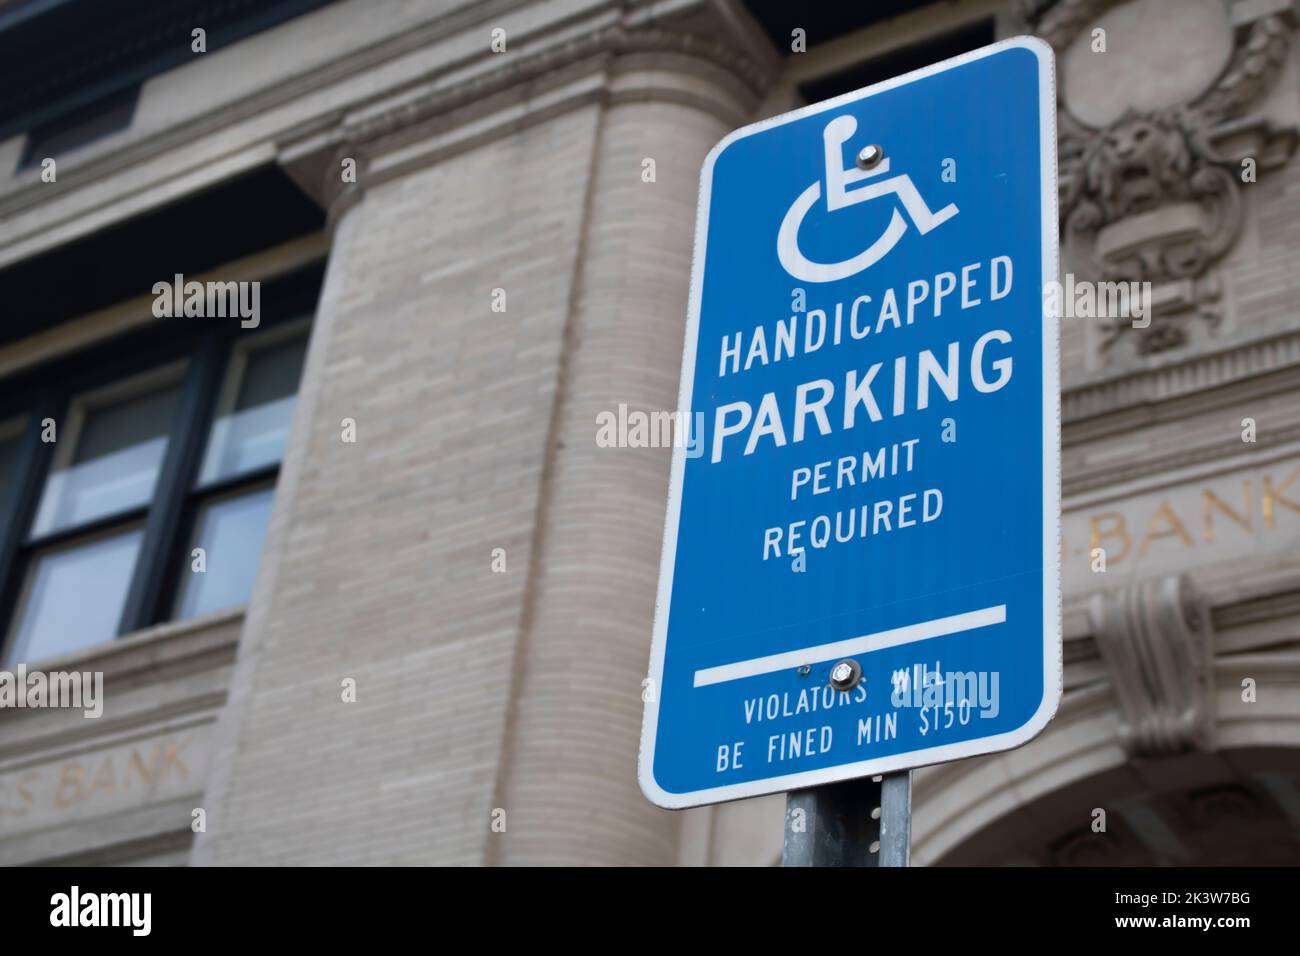 motorest Reserved Parking Sign Parking Permit Required Violators Will Be Fined Min $150 Stock Photo